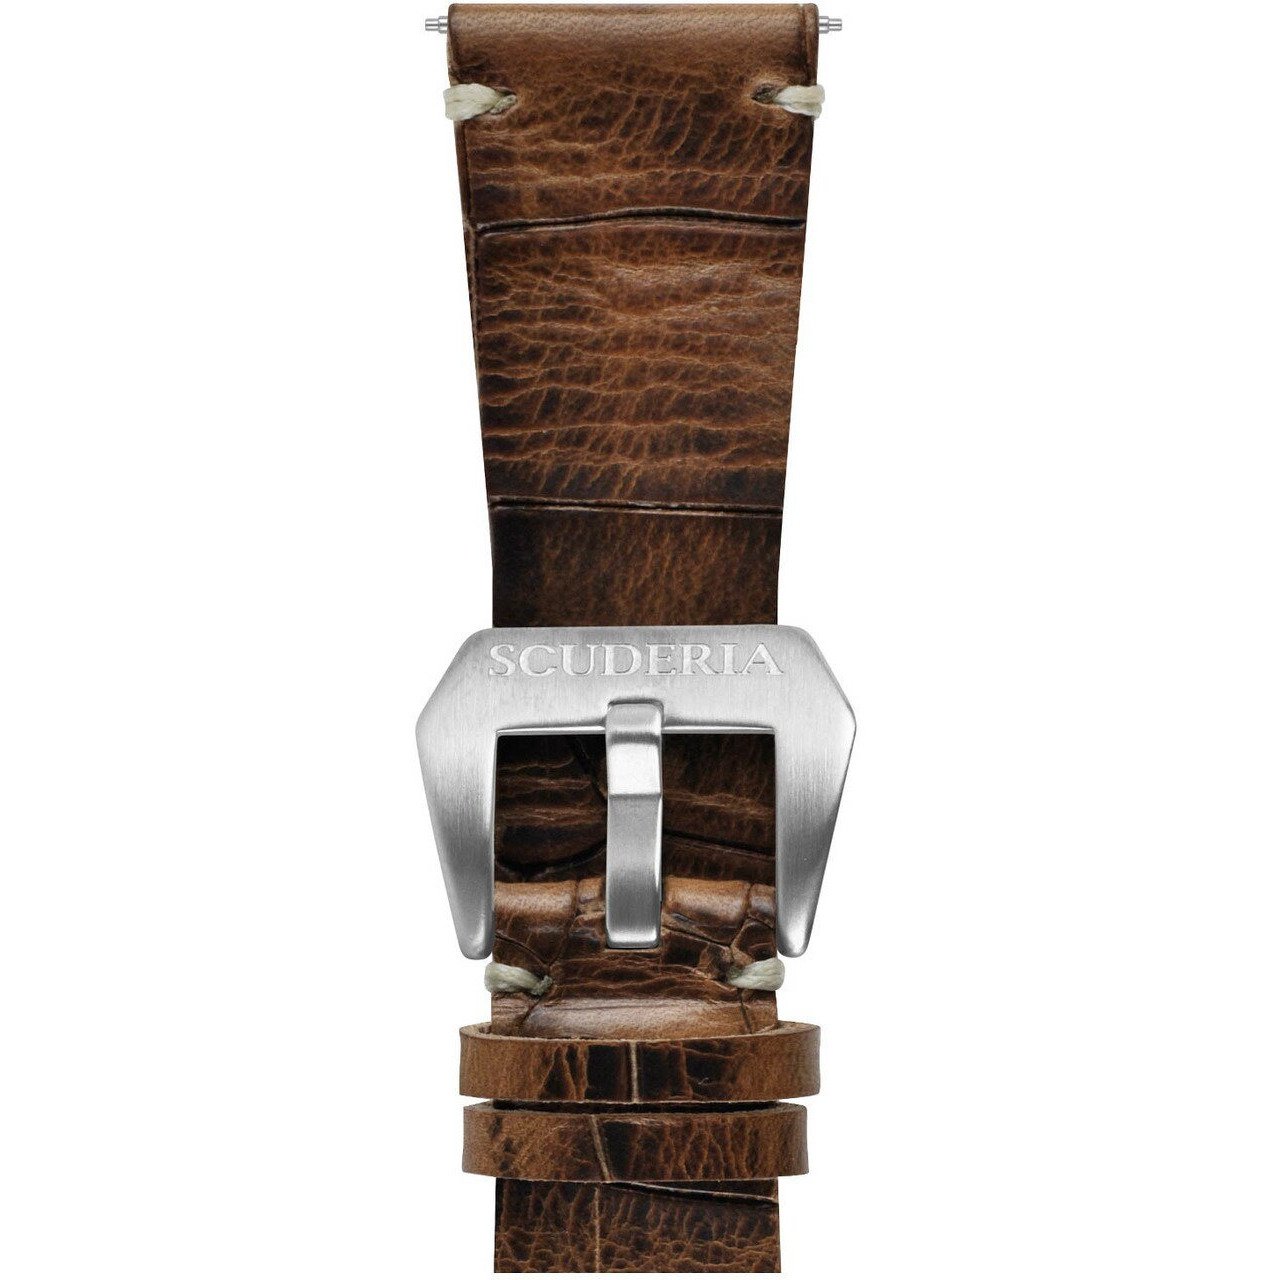 CT Scuderia 26mm Croc Print Waxed Brown Leather Strap